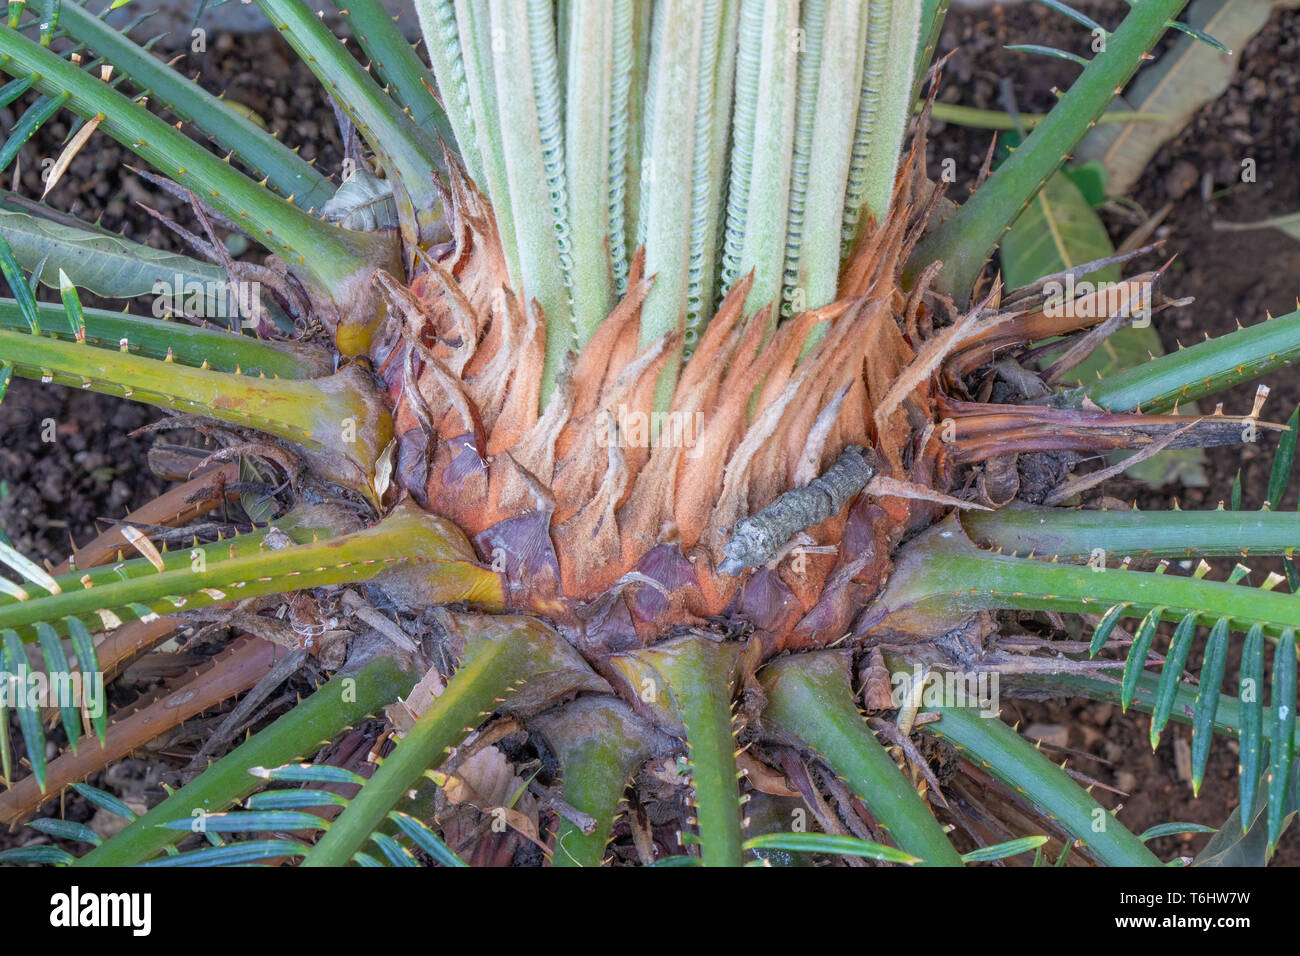 SAGO Palm, Cycas plant bud cones converting into new leafs Stock Photo